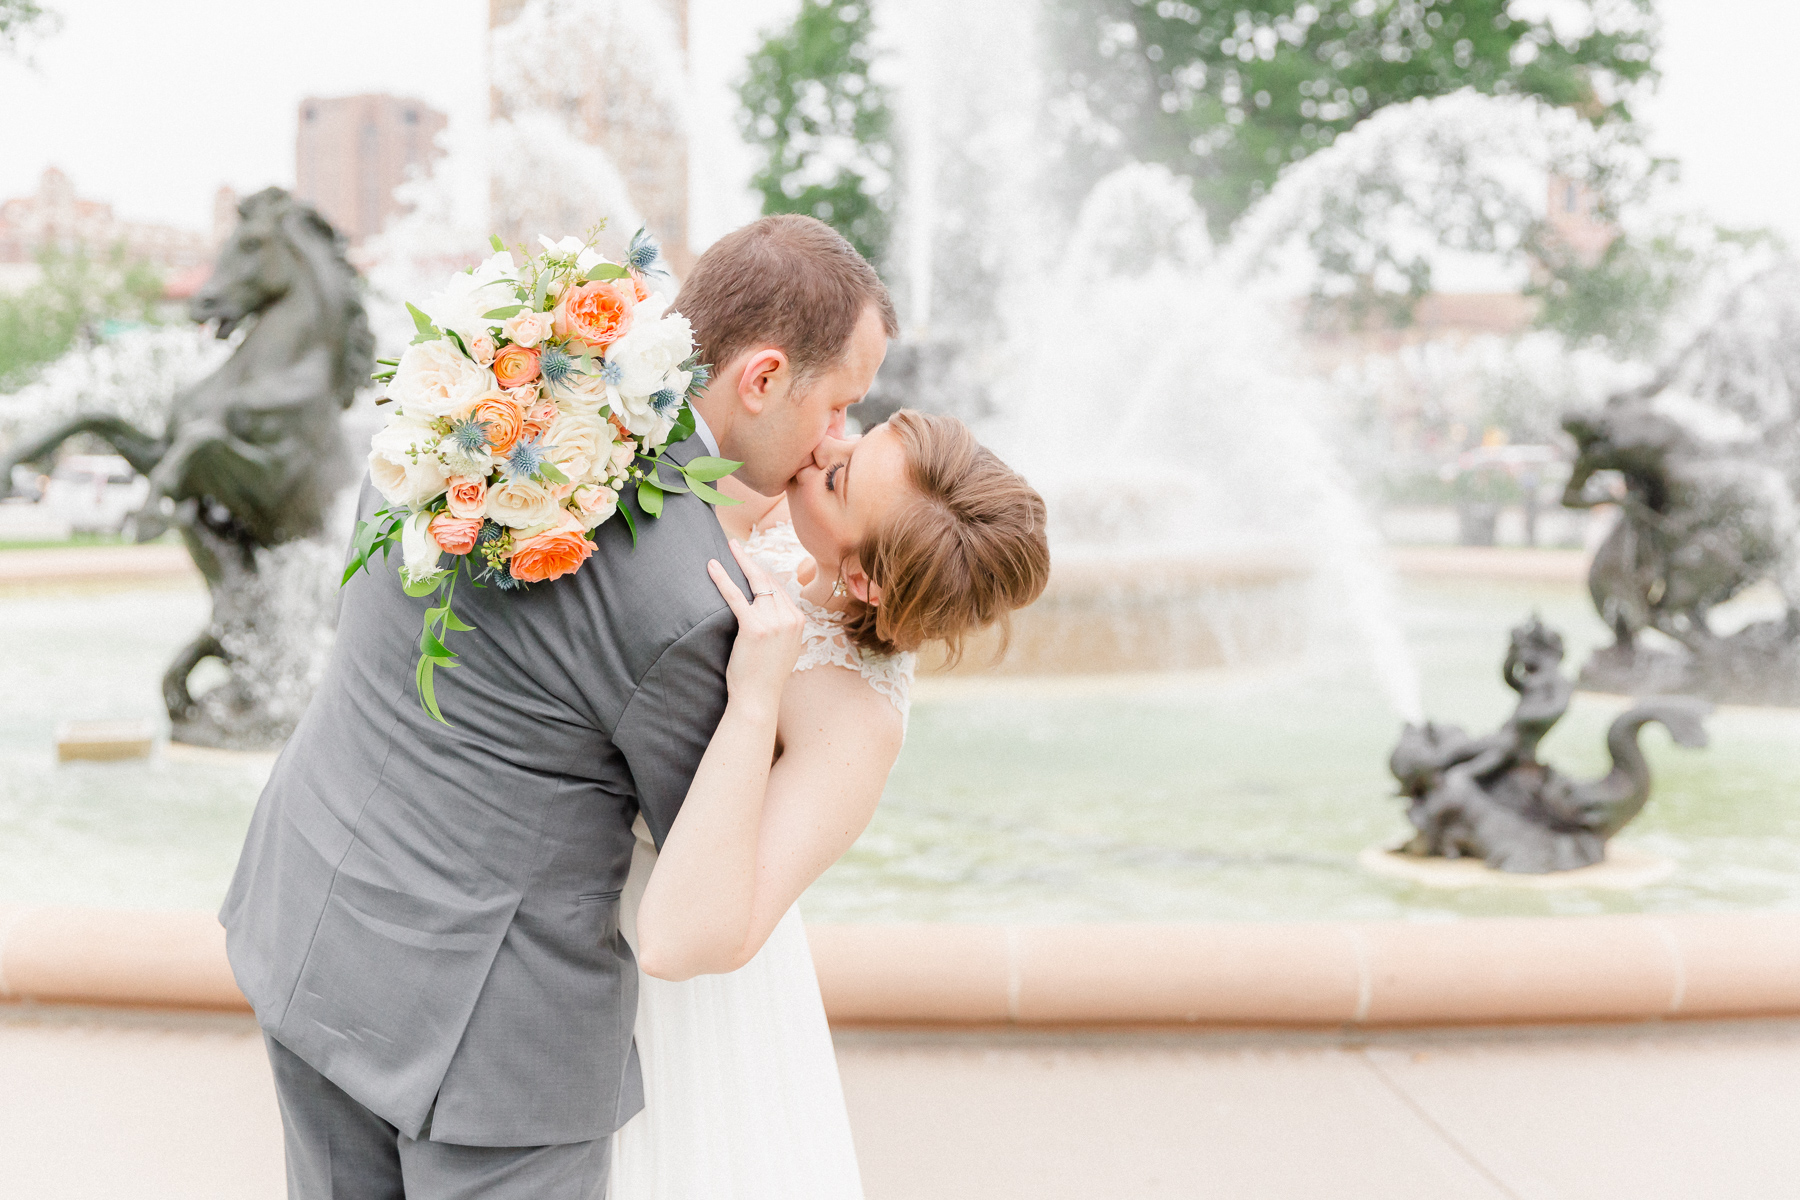 intimate spring peach, navy & green backyard wedding with BHLDN gown